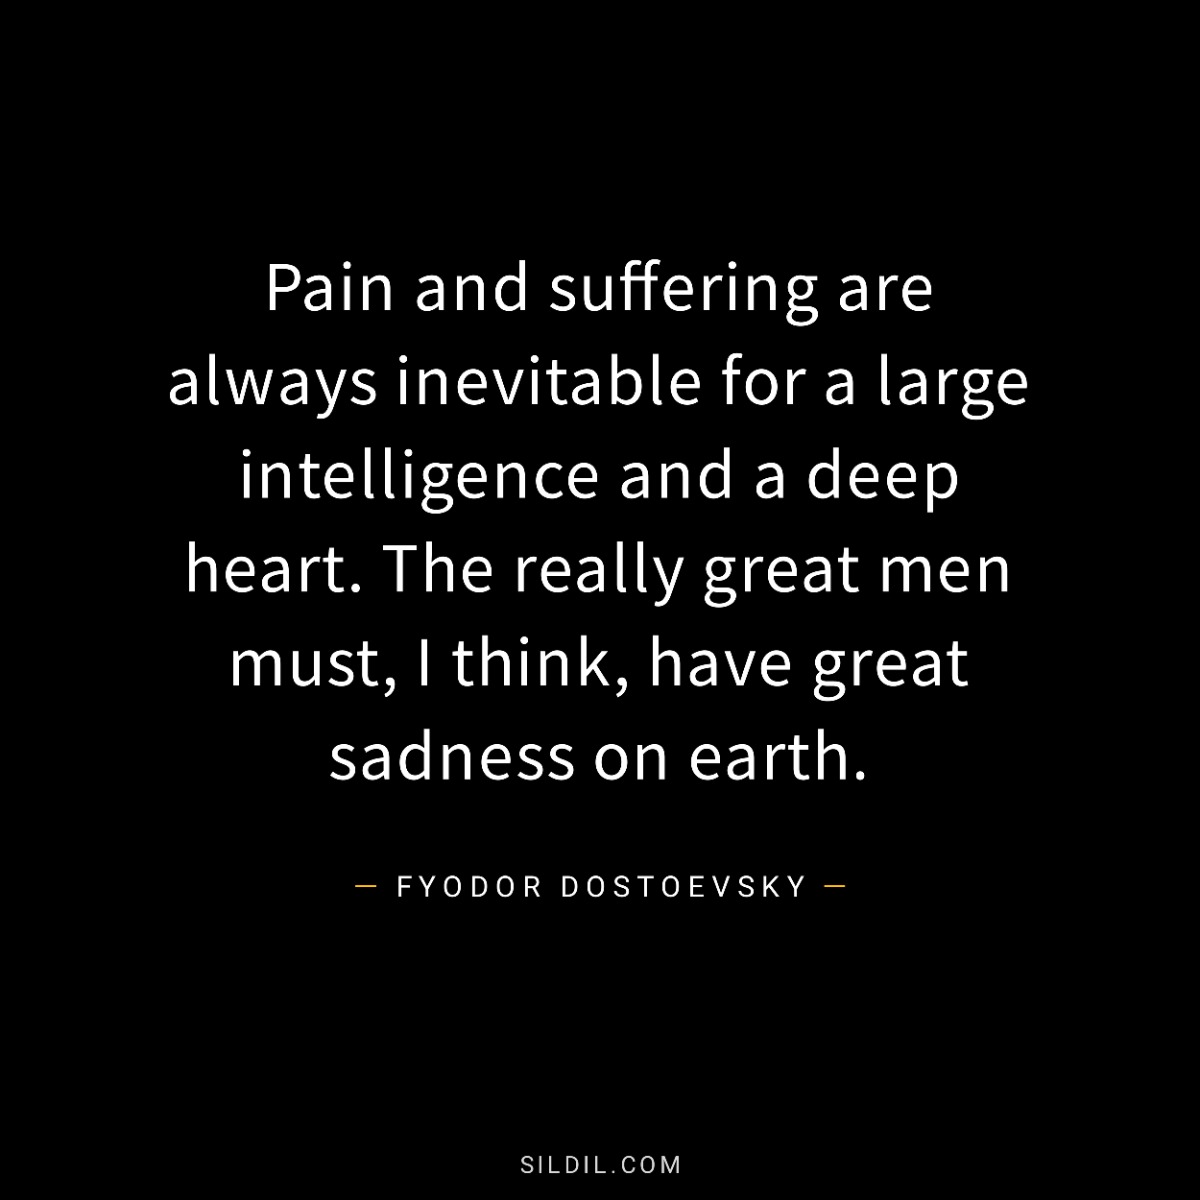 Pain and suffering are always inevitable for a large intelligence and a deep heart. The really great men must, I think, have great sadness on earth.